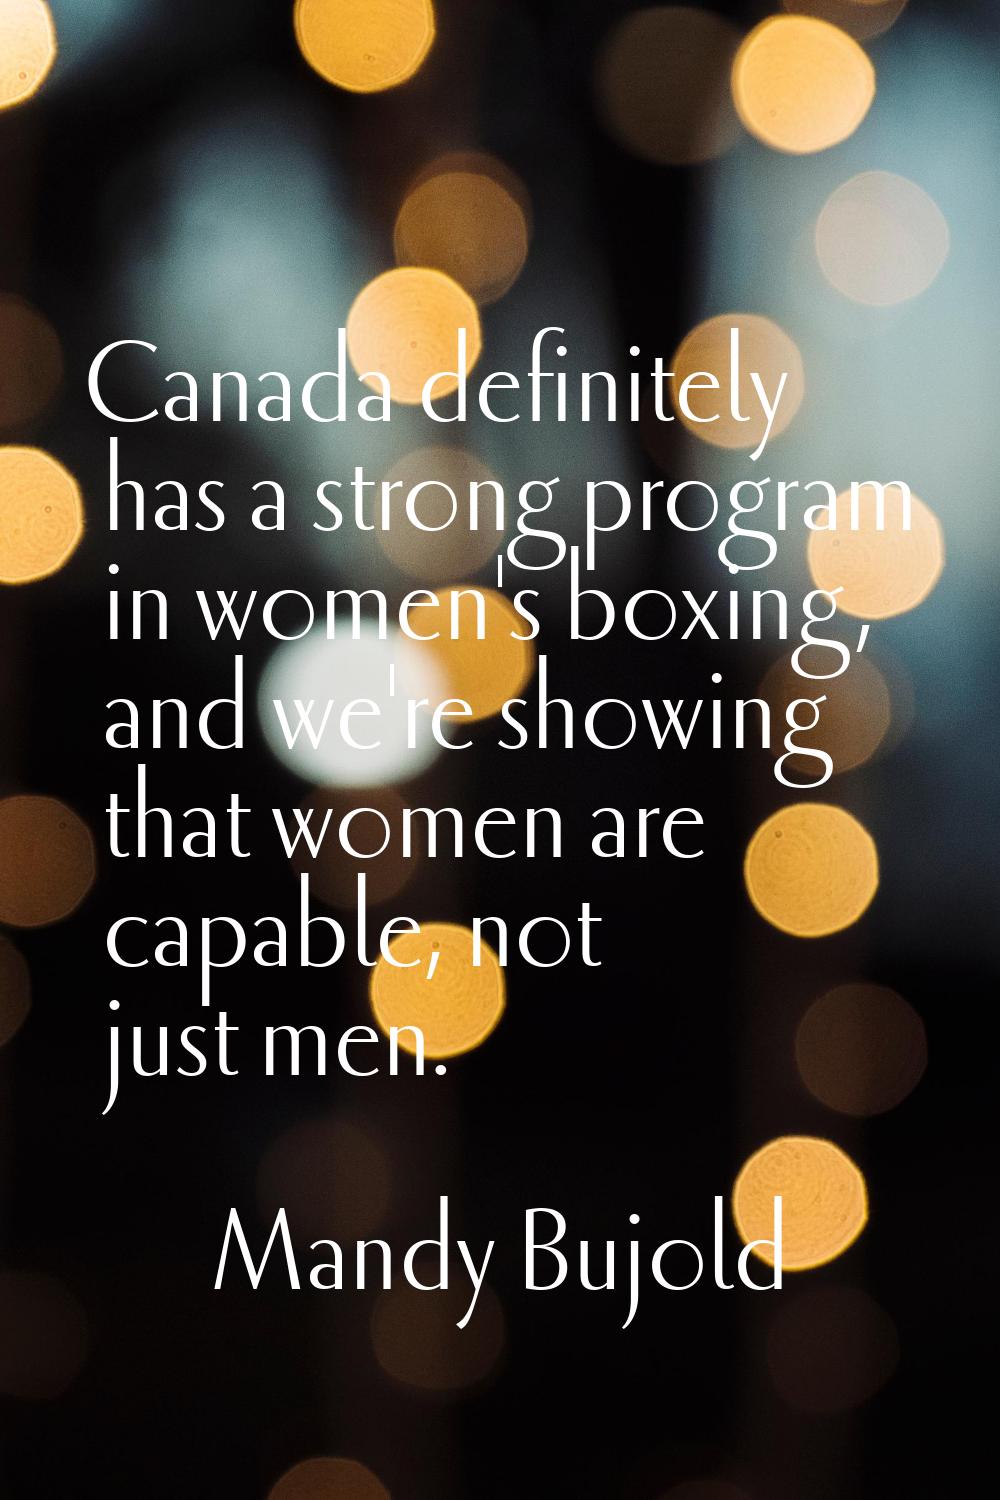 Canada definitely has a strong program in women's boxing, and we're showing that women are capable,